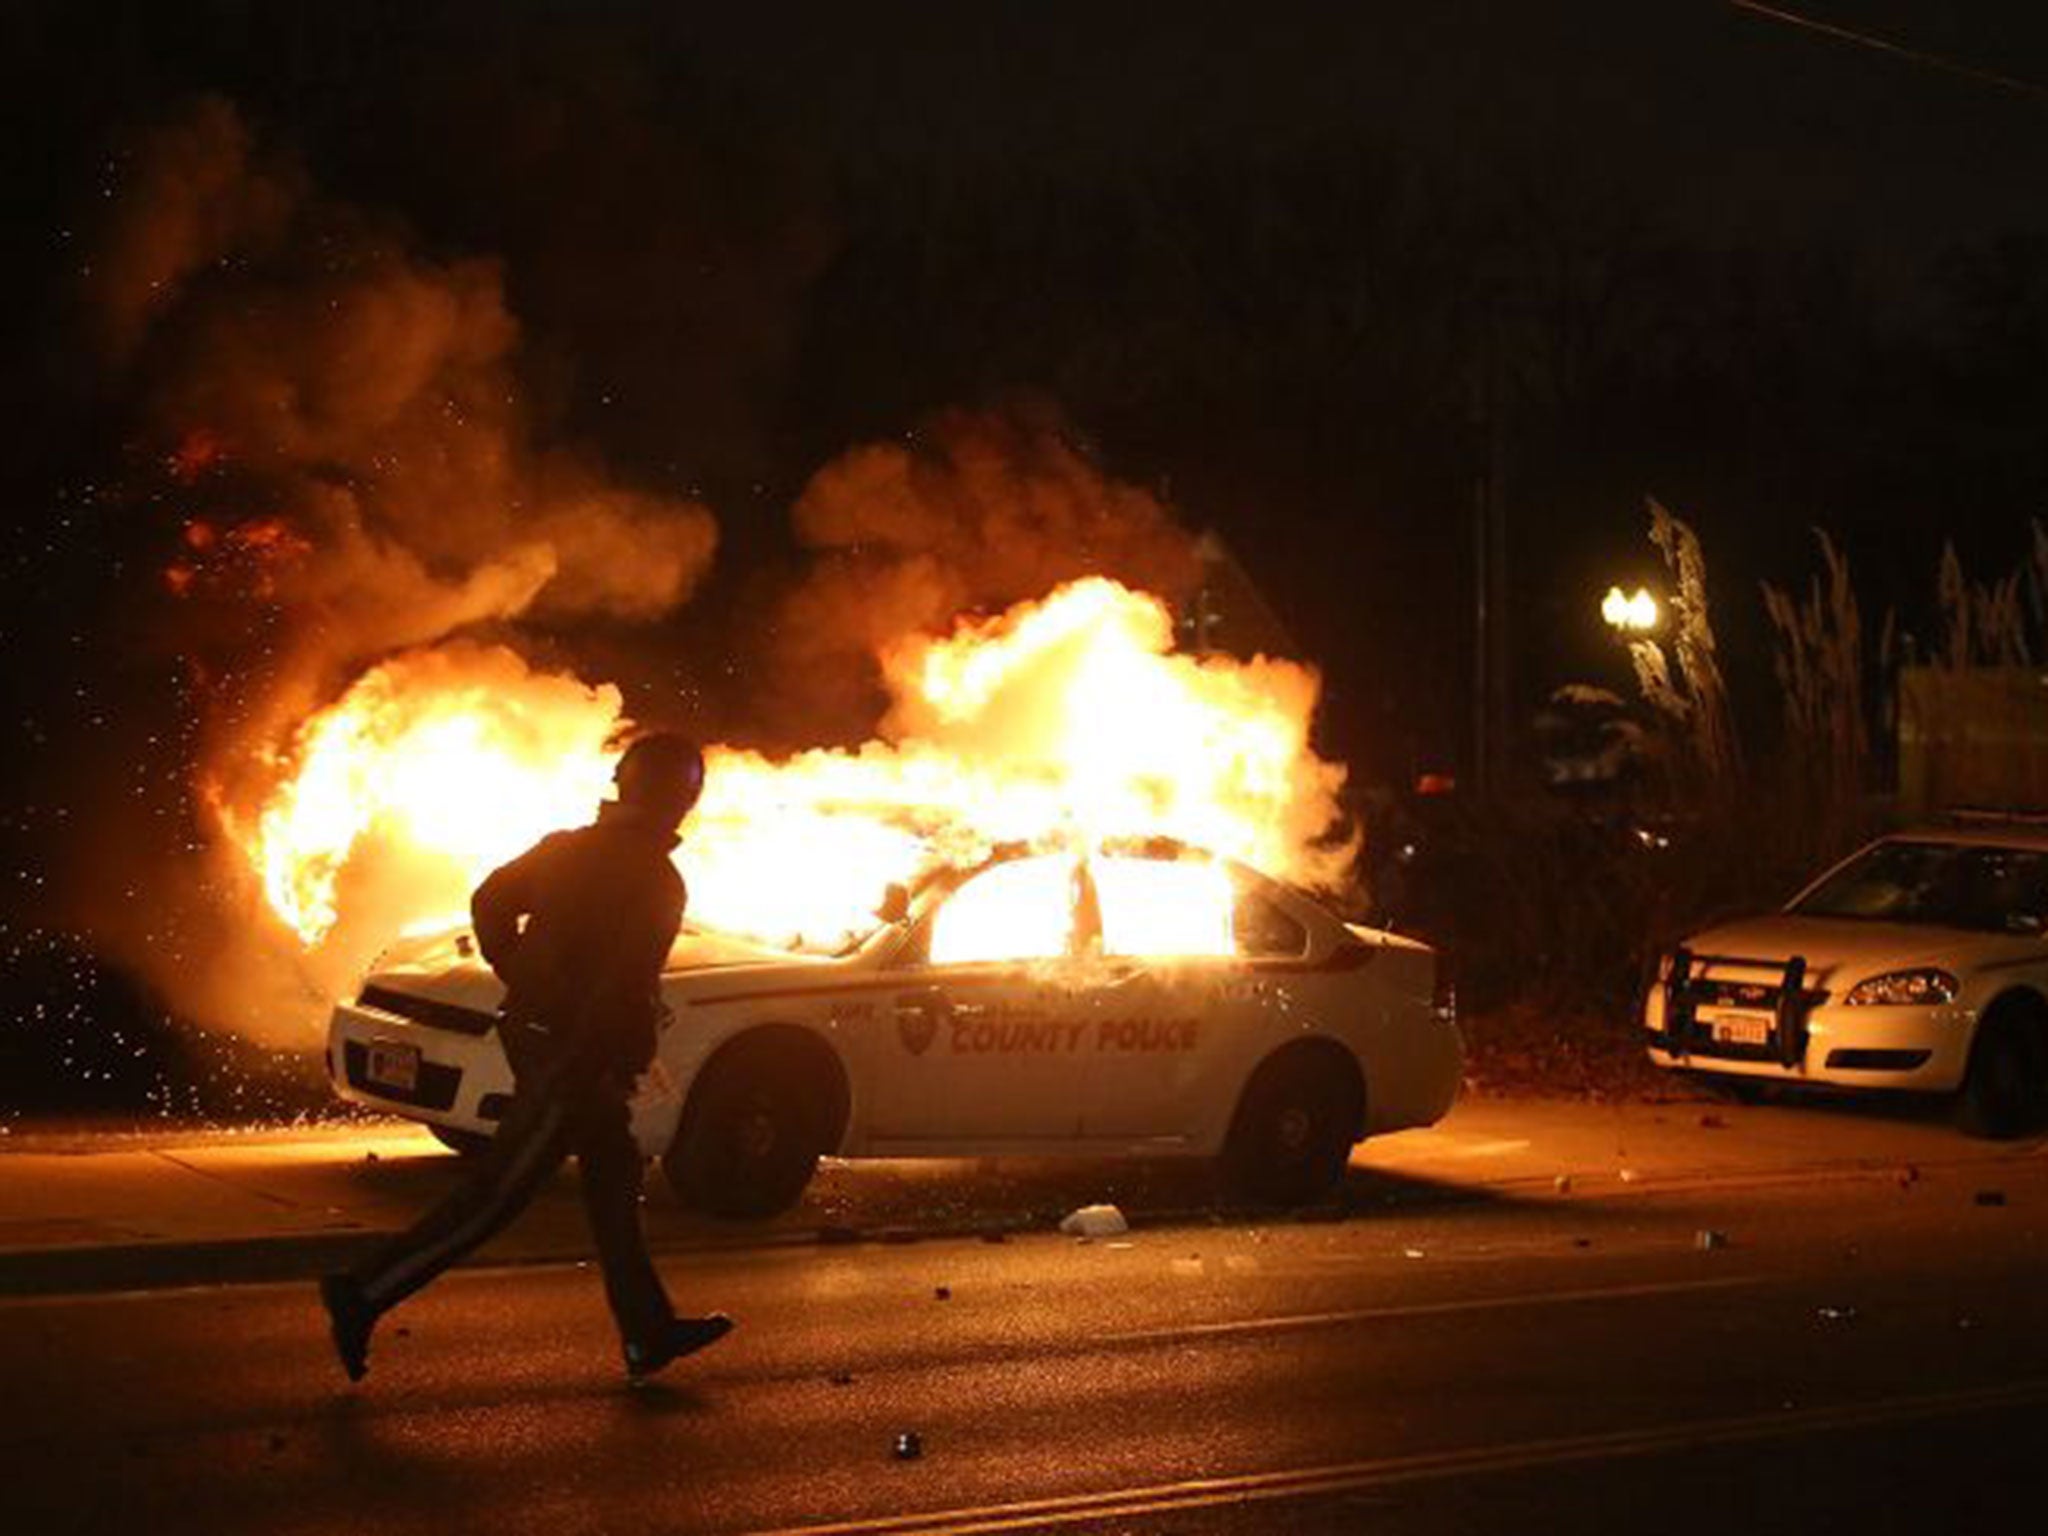 A car burns on the street after a grand jury returned no indictment in the shooting of Michael Brown